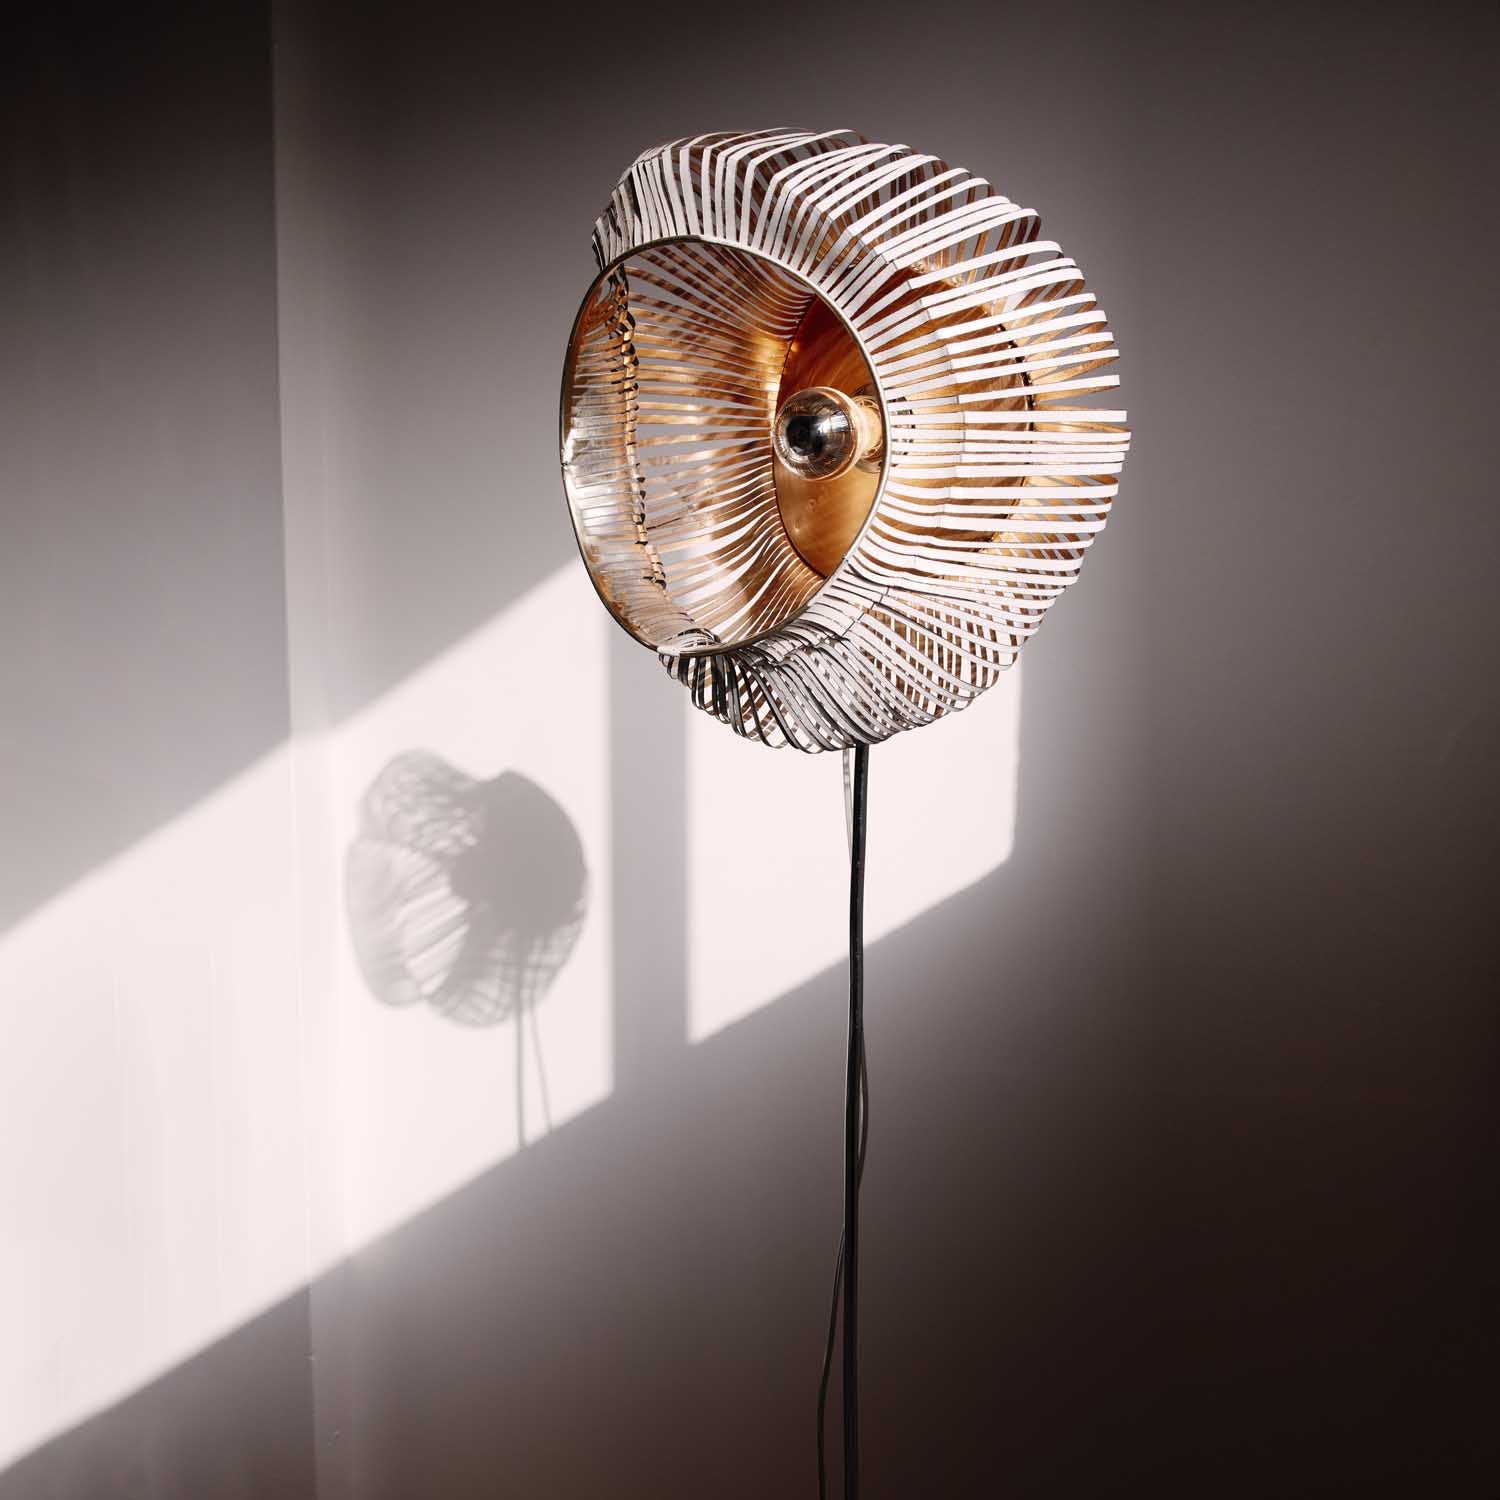 Fuga Sustainable Light: Bendable Design on Display